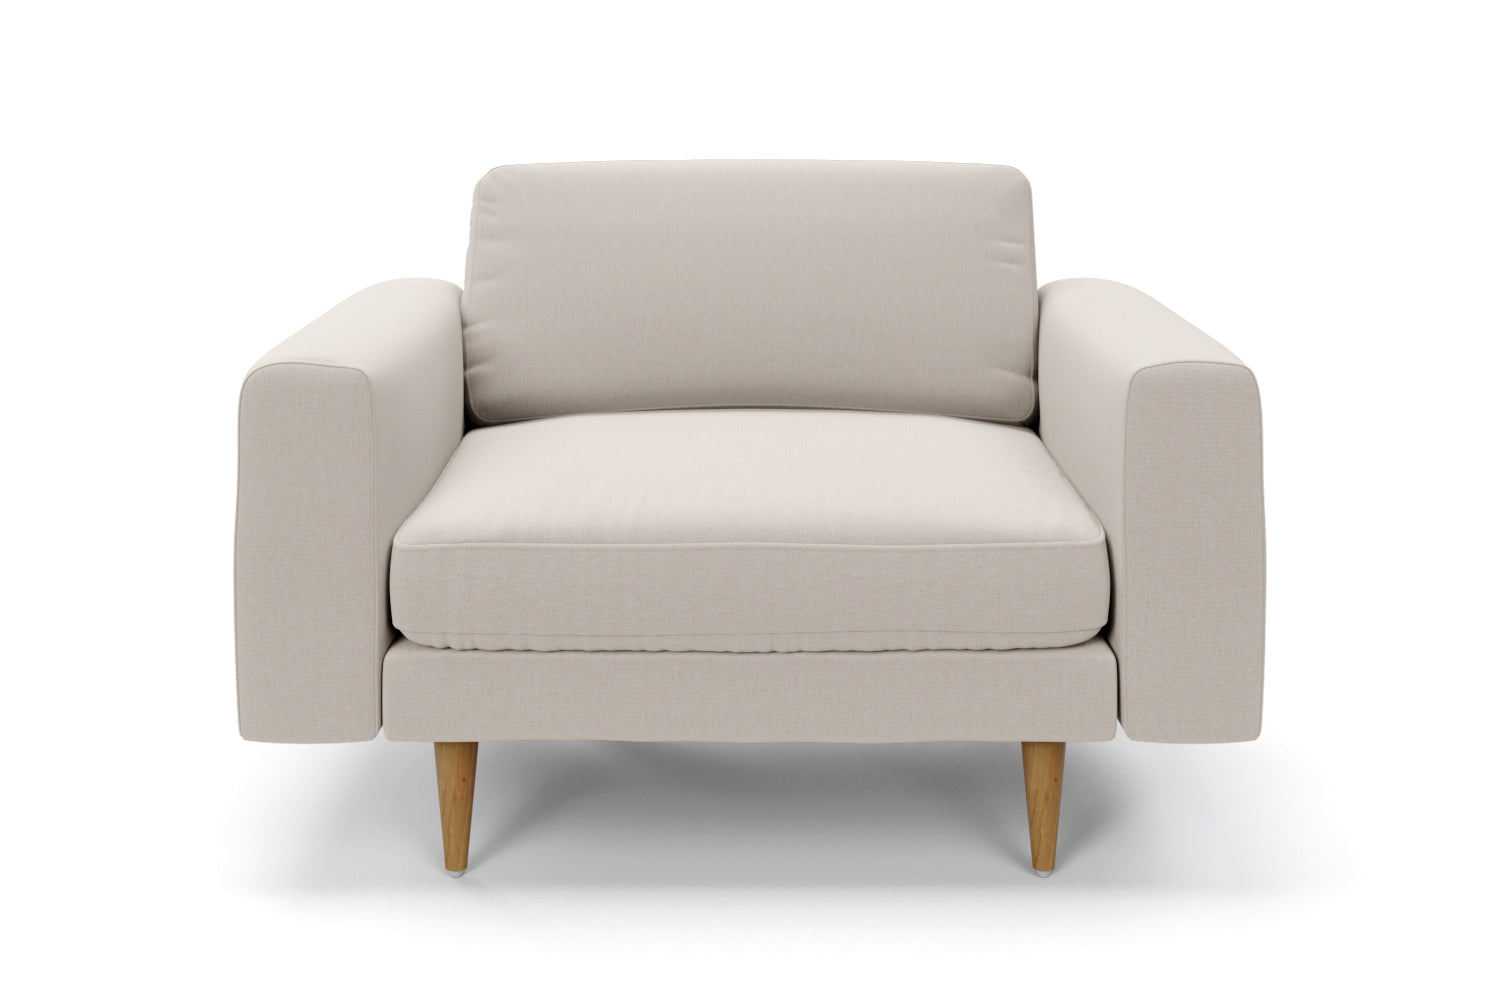 SNUG | The Big Chill 1.5 Seater Snuggler in Biscuit variant_40520425308208